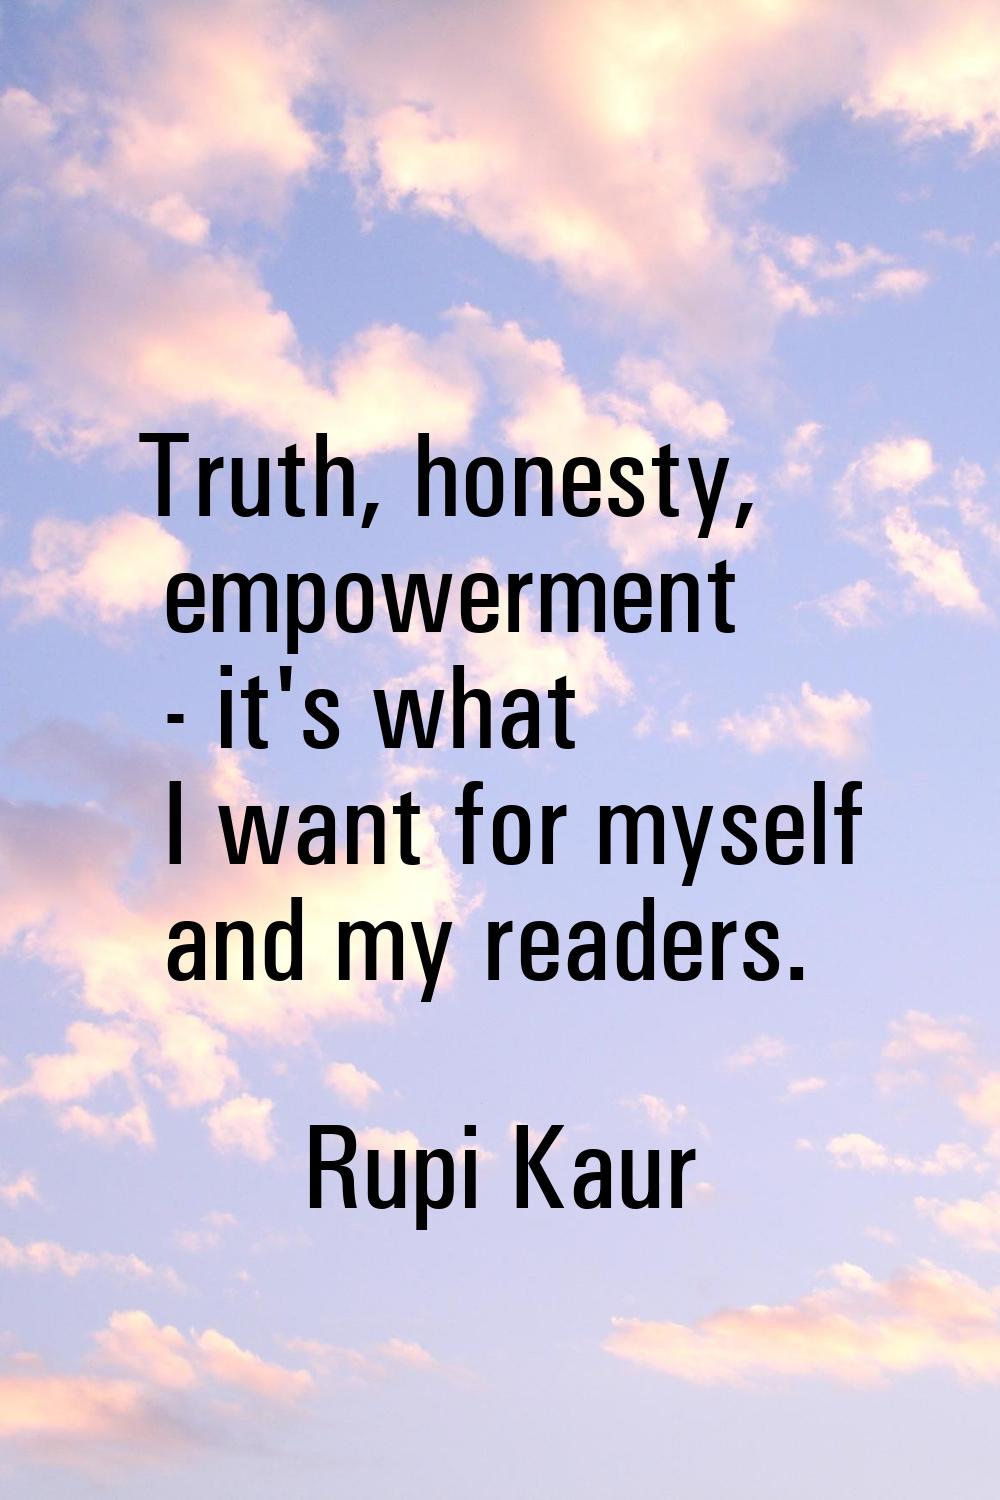 Truth, honesty, empowerment - it's what I want for myself and my readers.